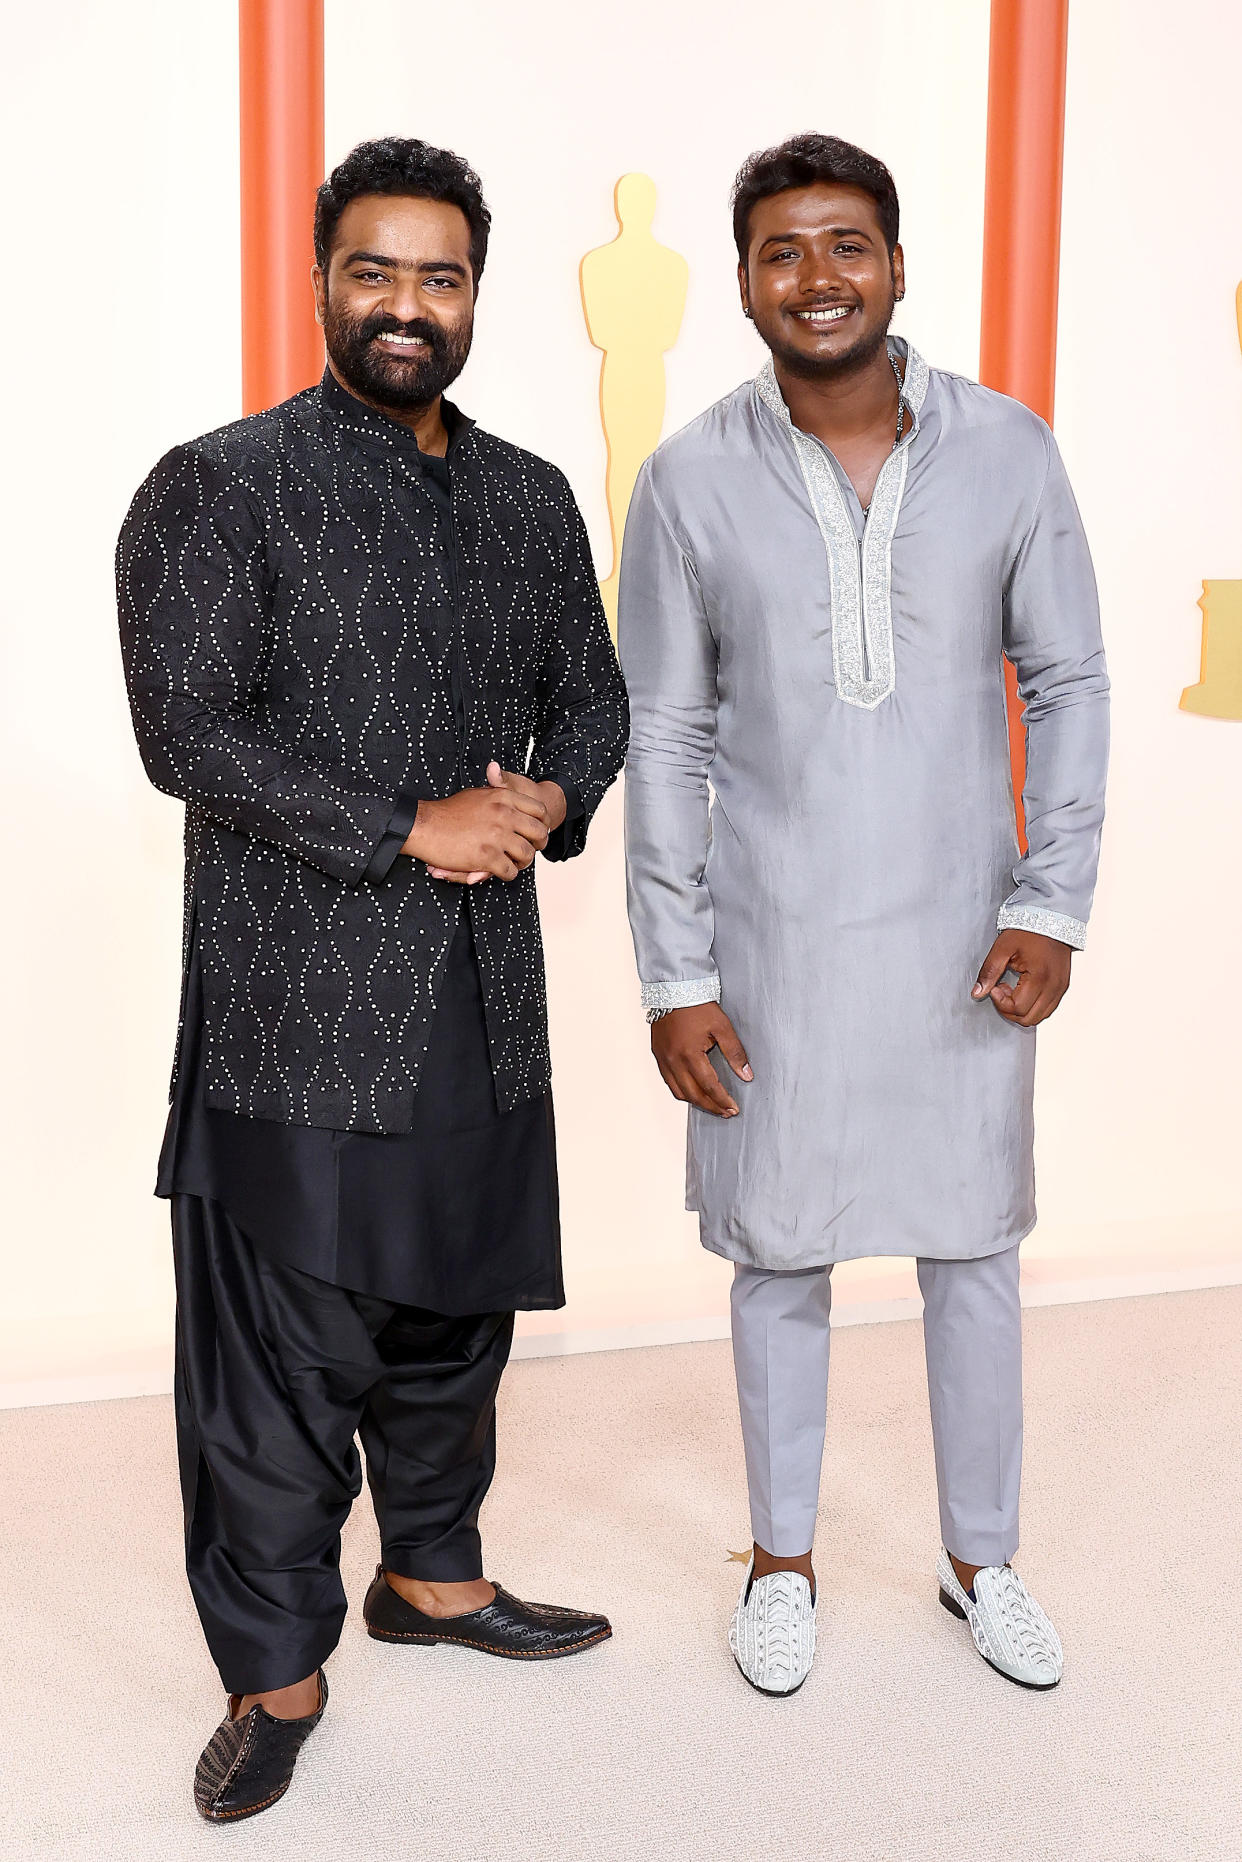 HOLLYWOOD, CALIFORNIA - MARCH 12: (L-R) Kaala Bhairava and Rahul Sipligunj attend the 95th Annual Academy Awards on March 12, 2023 in Hollywood, California. (Photo by Arturo Holmes/Getty Images )